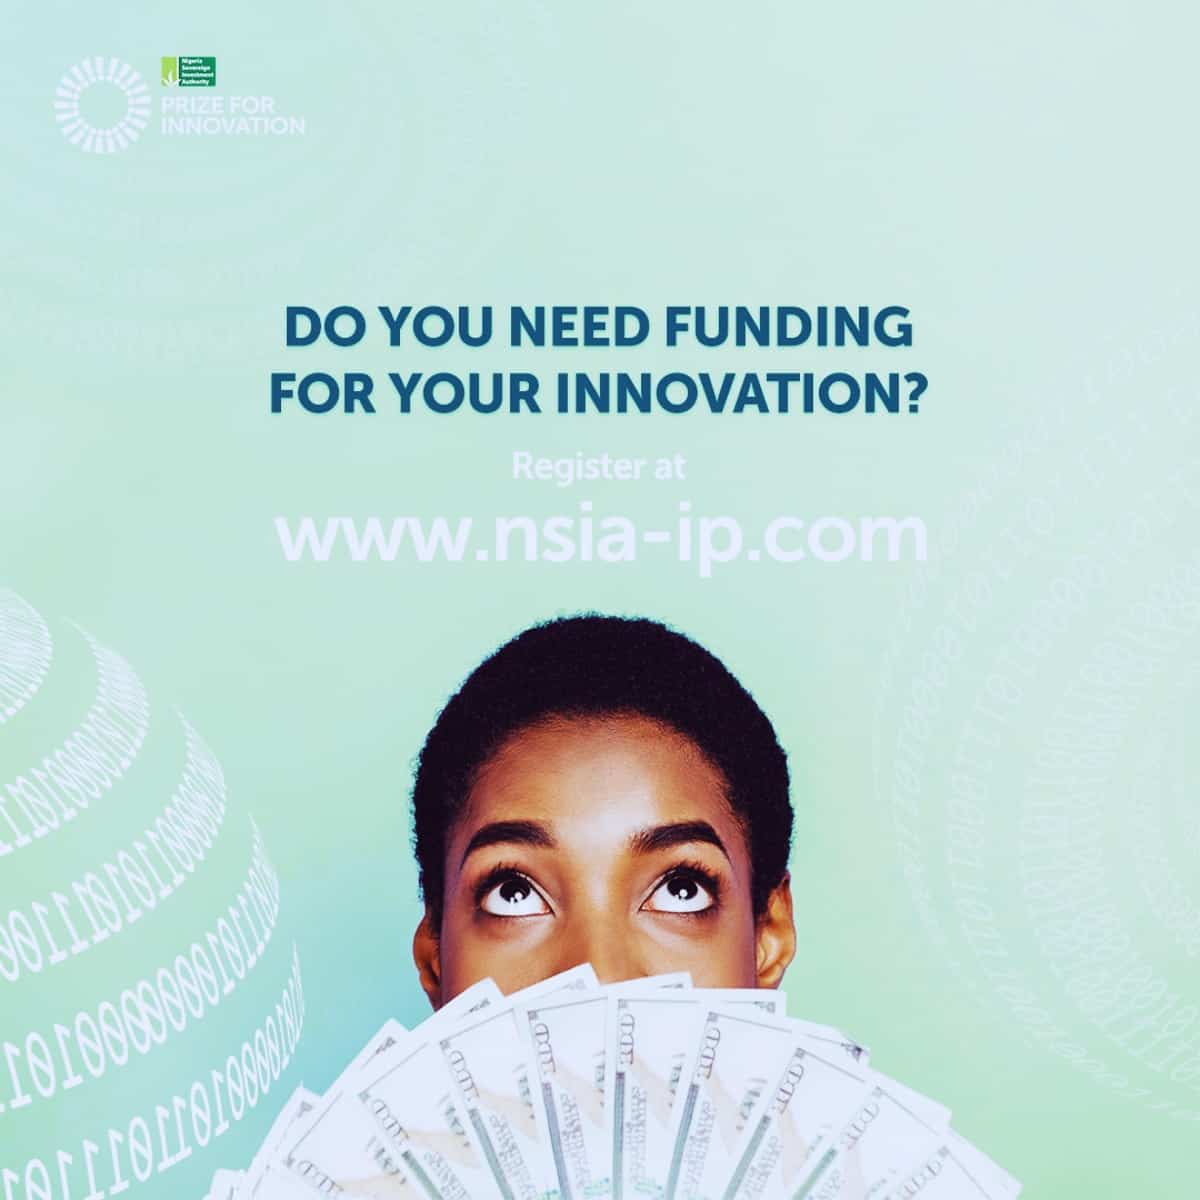 Apply Now for NSIA Prize for Innovation